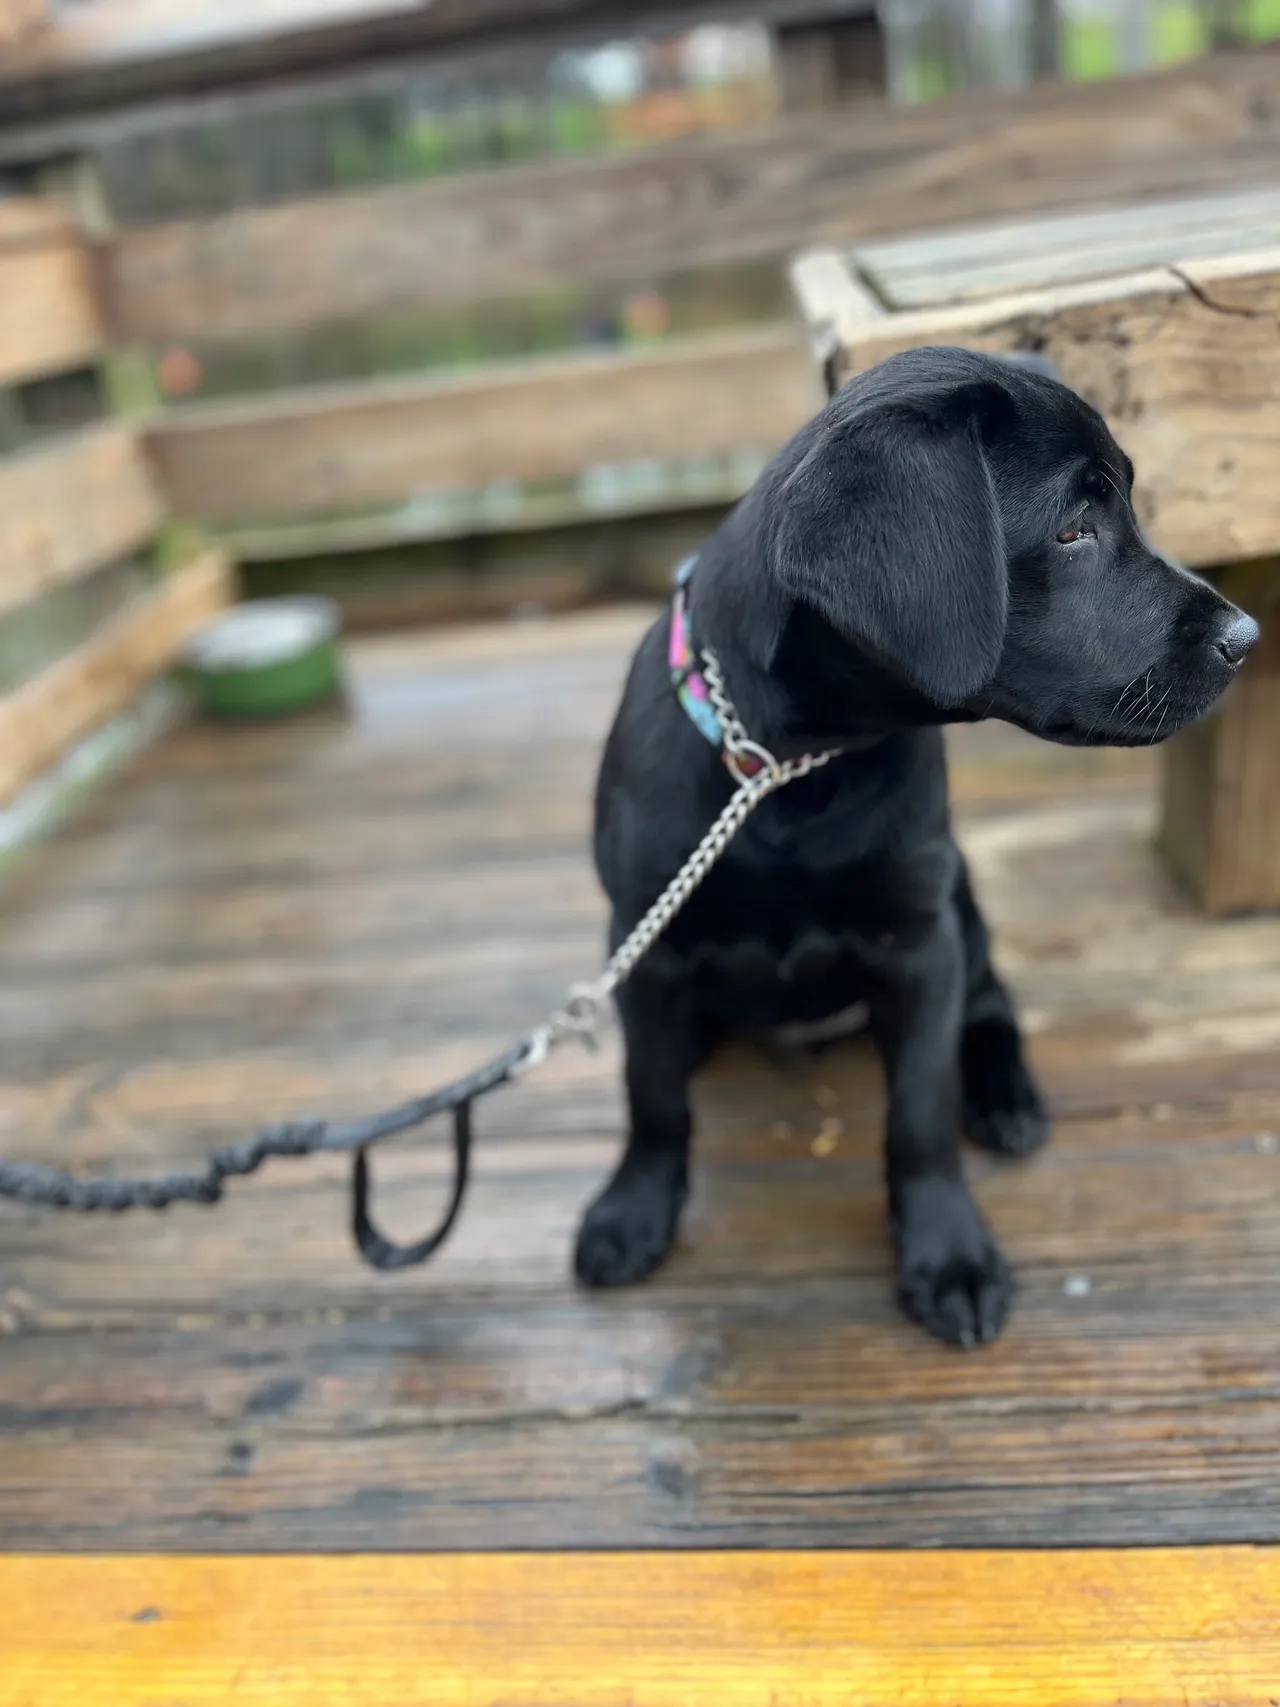 A black dog sitting on top of a wooden deck.